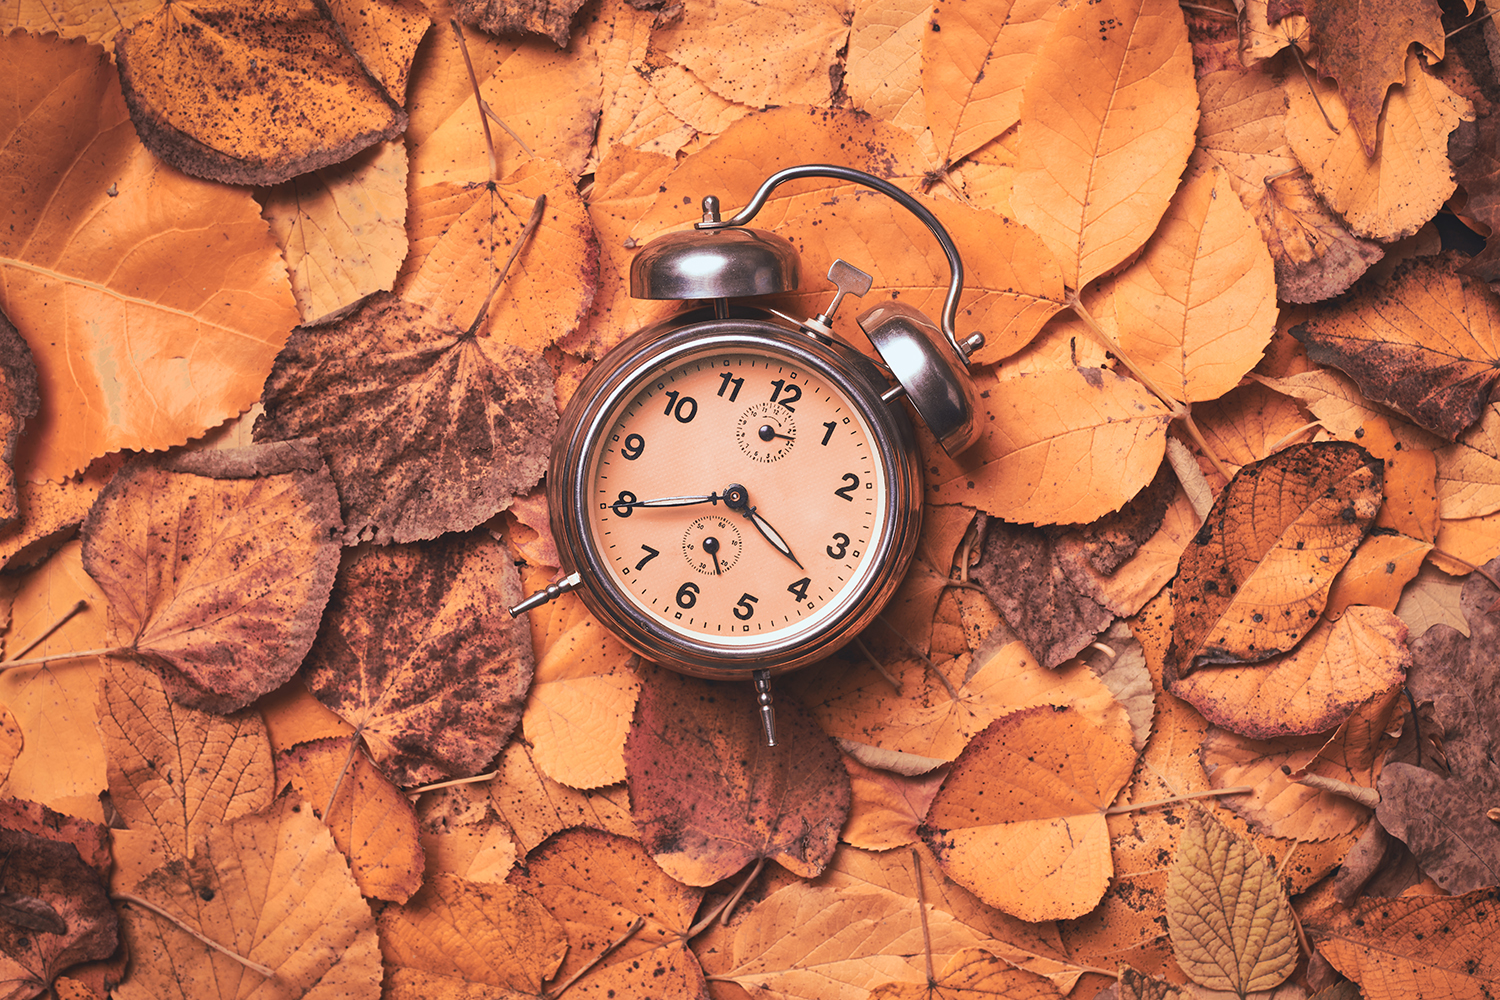 Daylight Saving Time: 4 Tips to Prepare For "Falling Back" One Hour